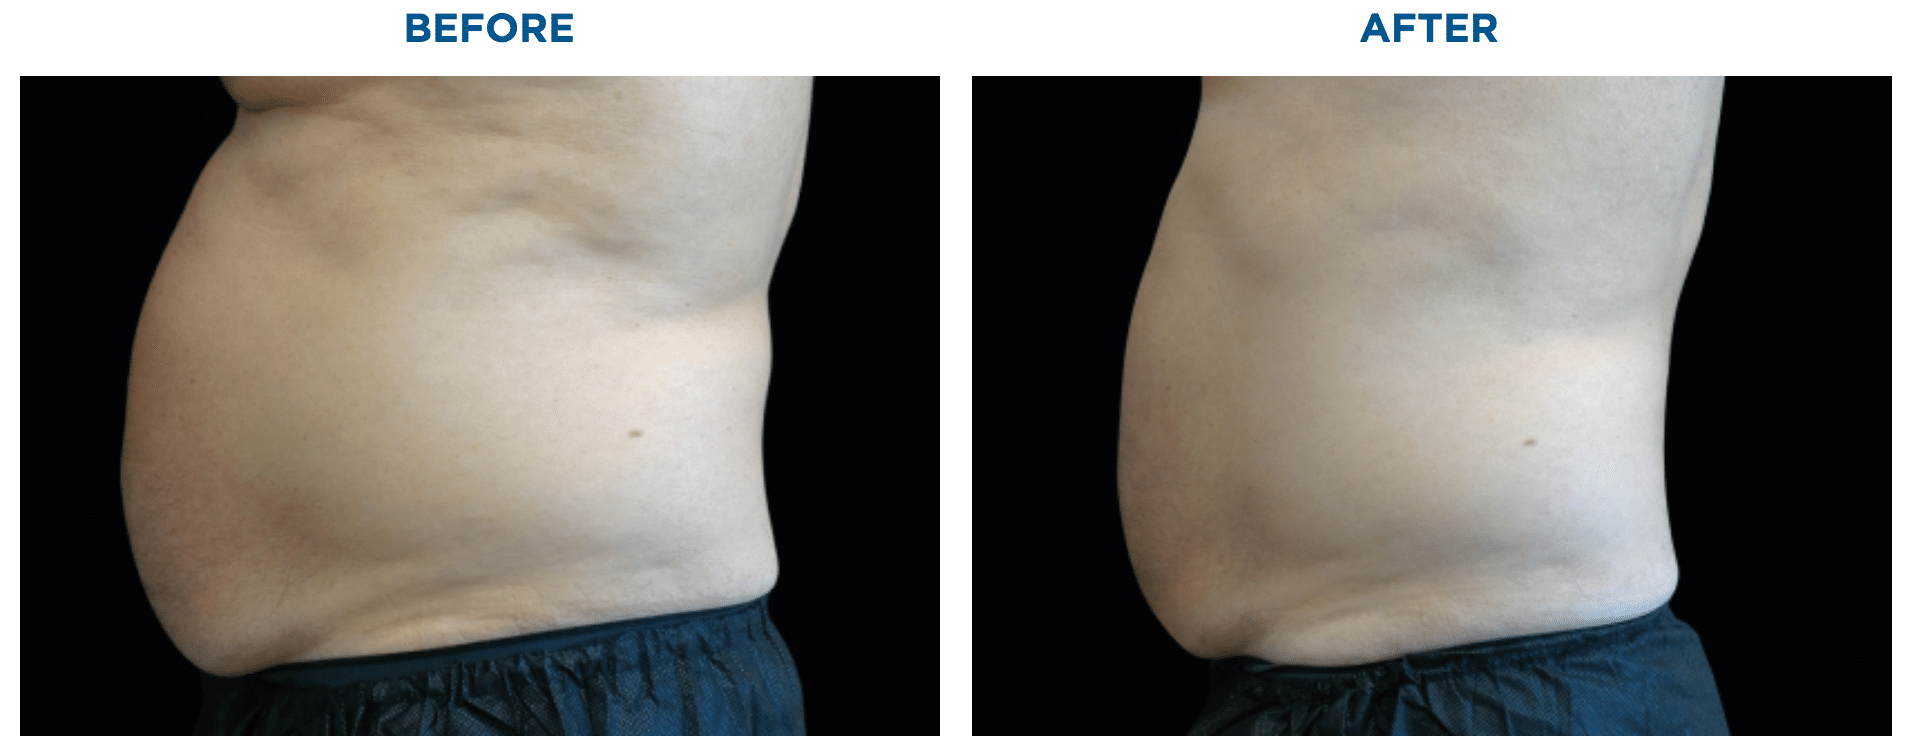 Male abdomen before and after Emsculpt NEO body sculpting.